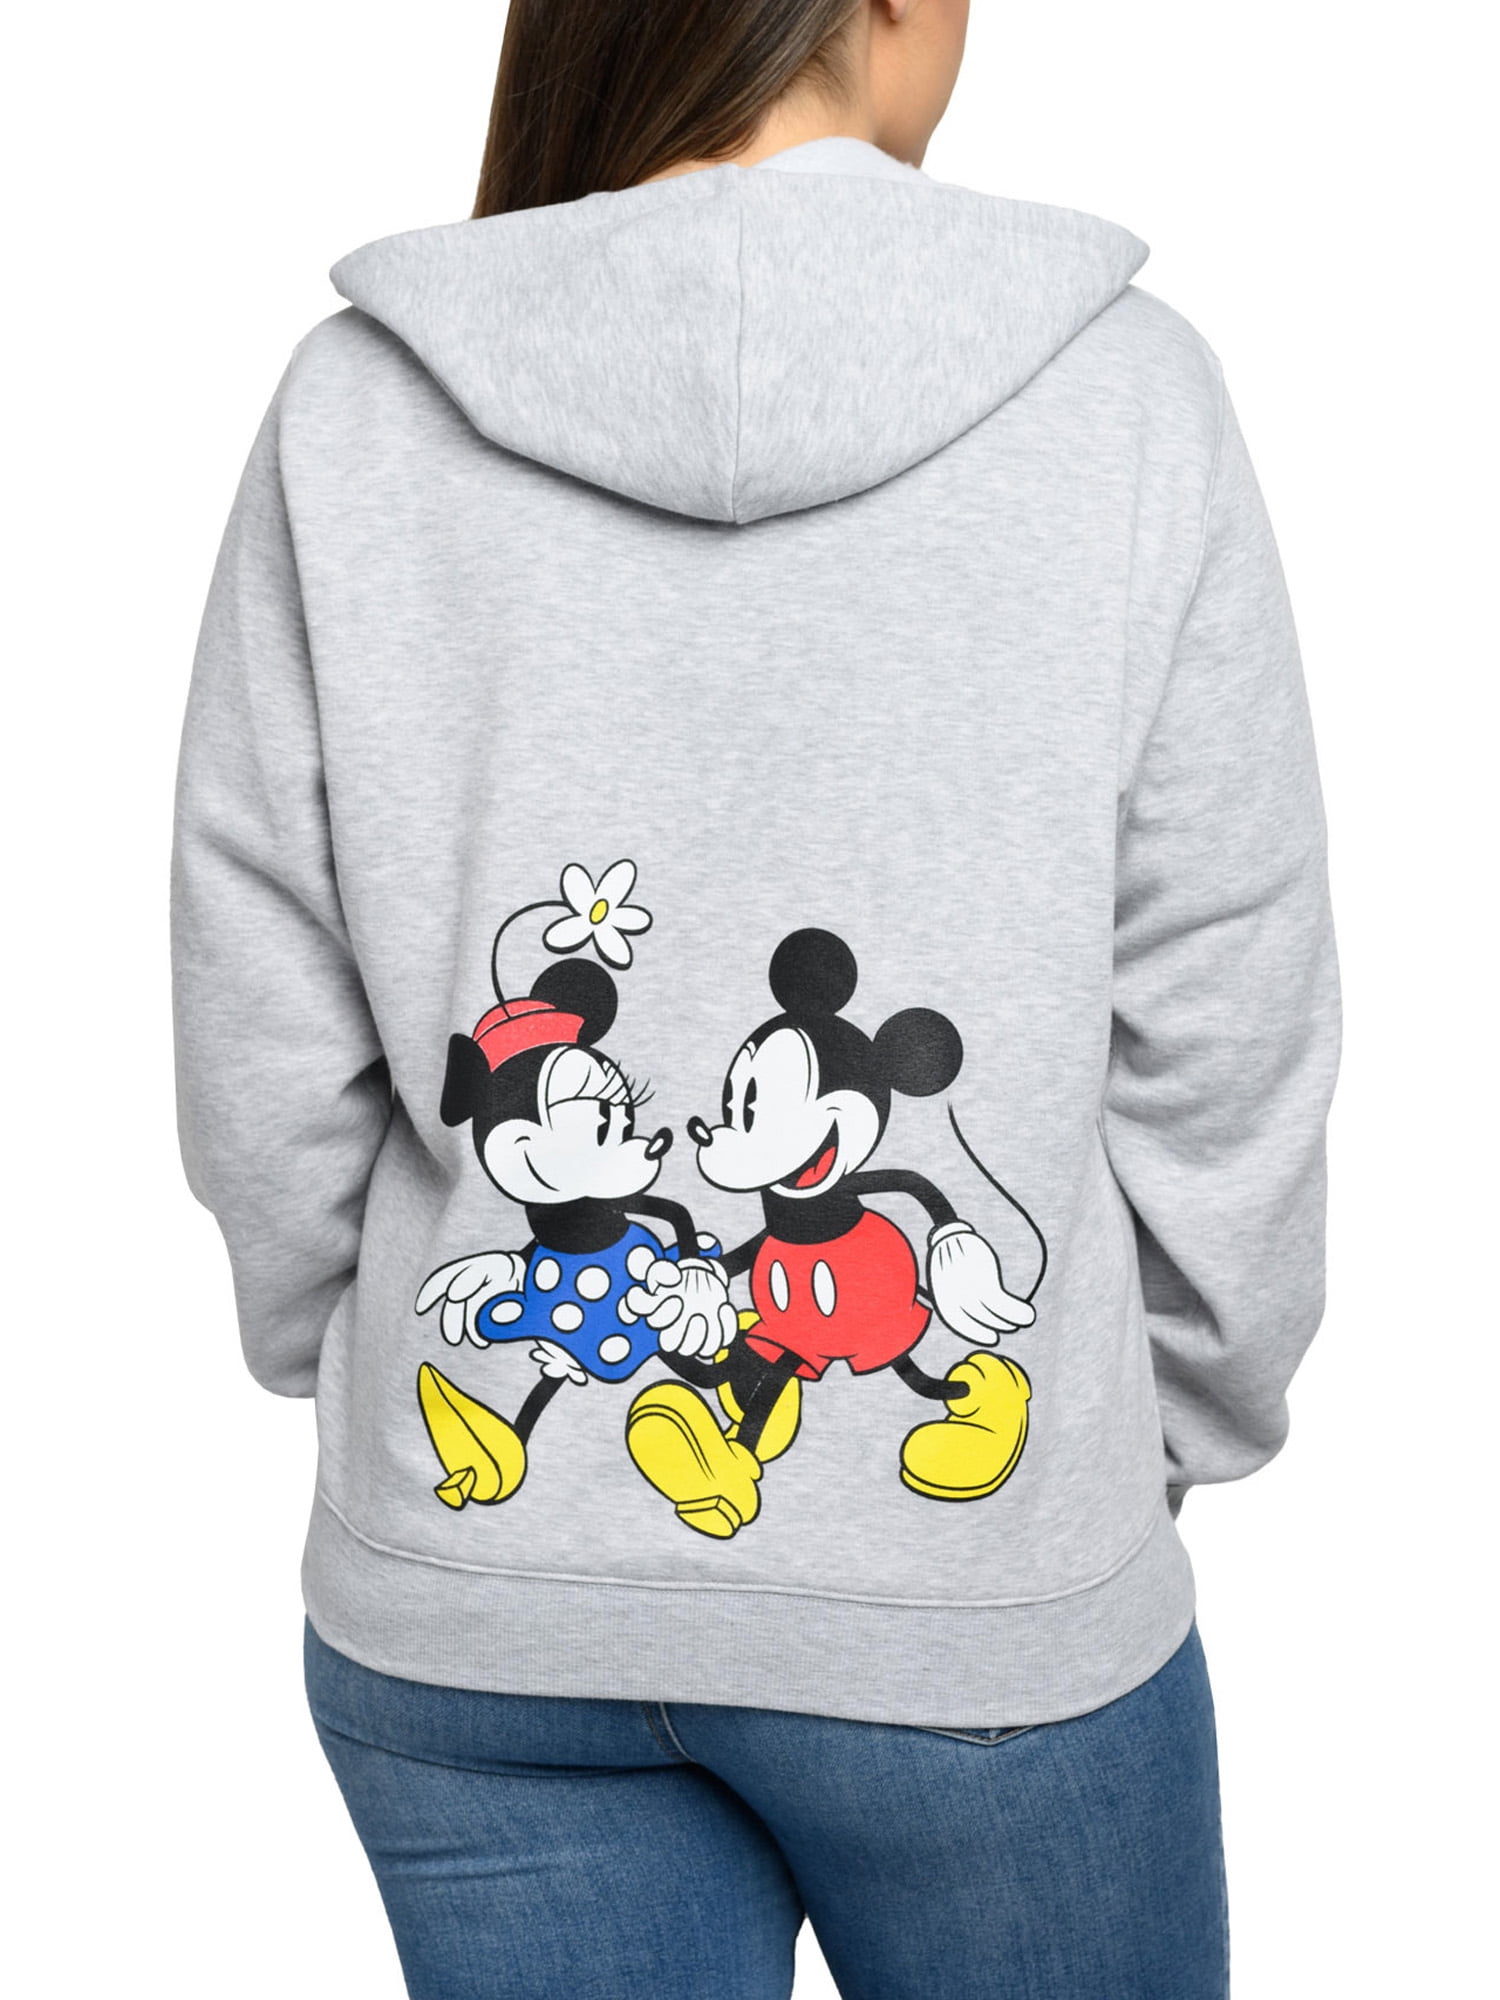 Disney Mickey and Minnie Mouse Zip Fleece Jacket for Women 